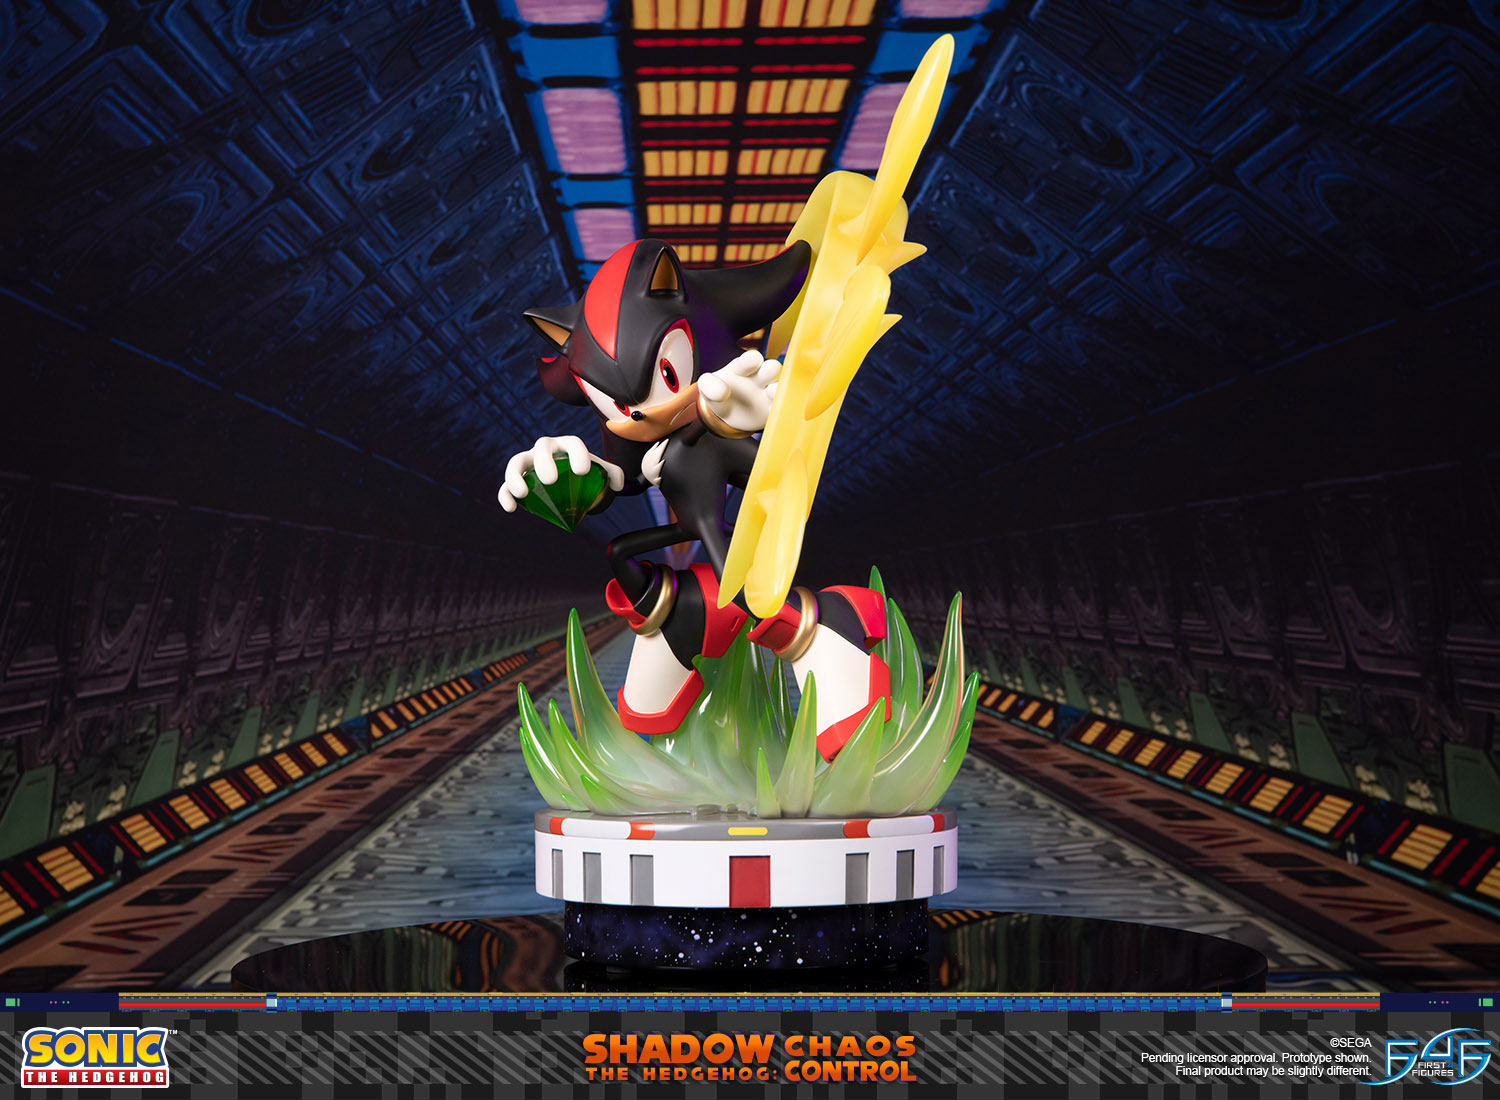 The Best Shadow the Hedgehog Games